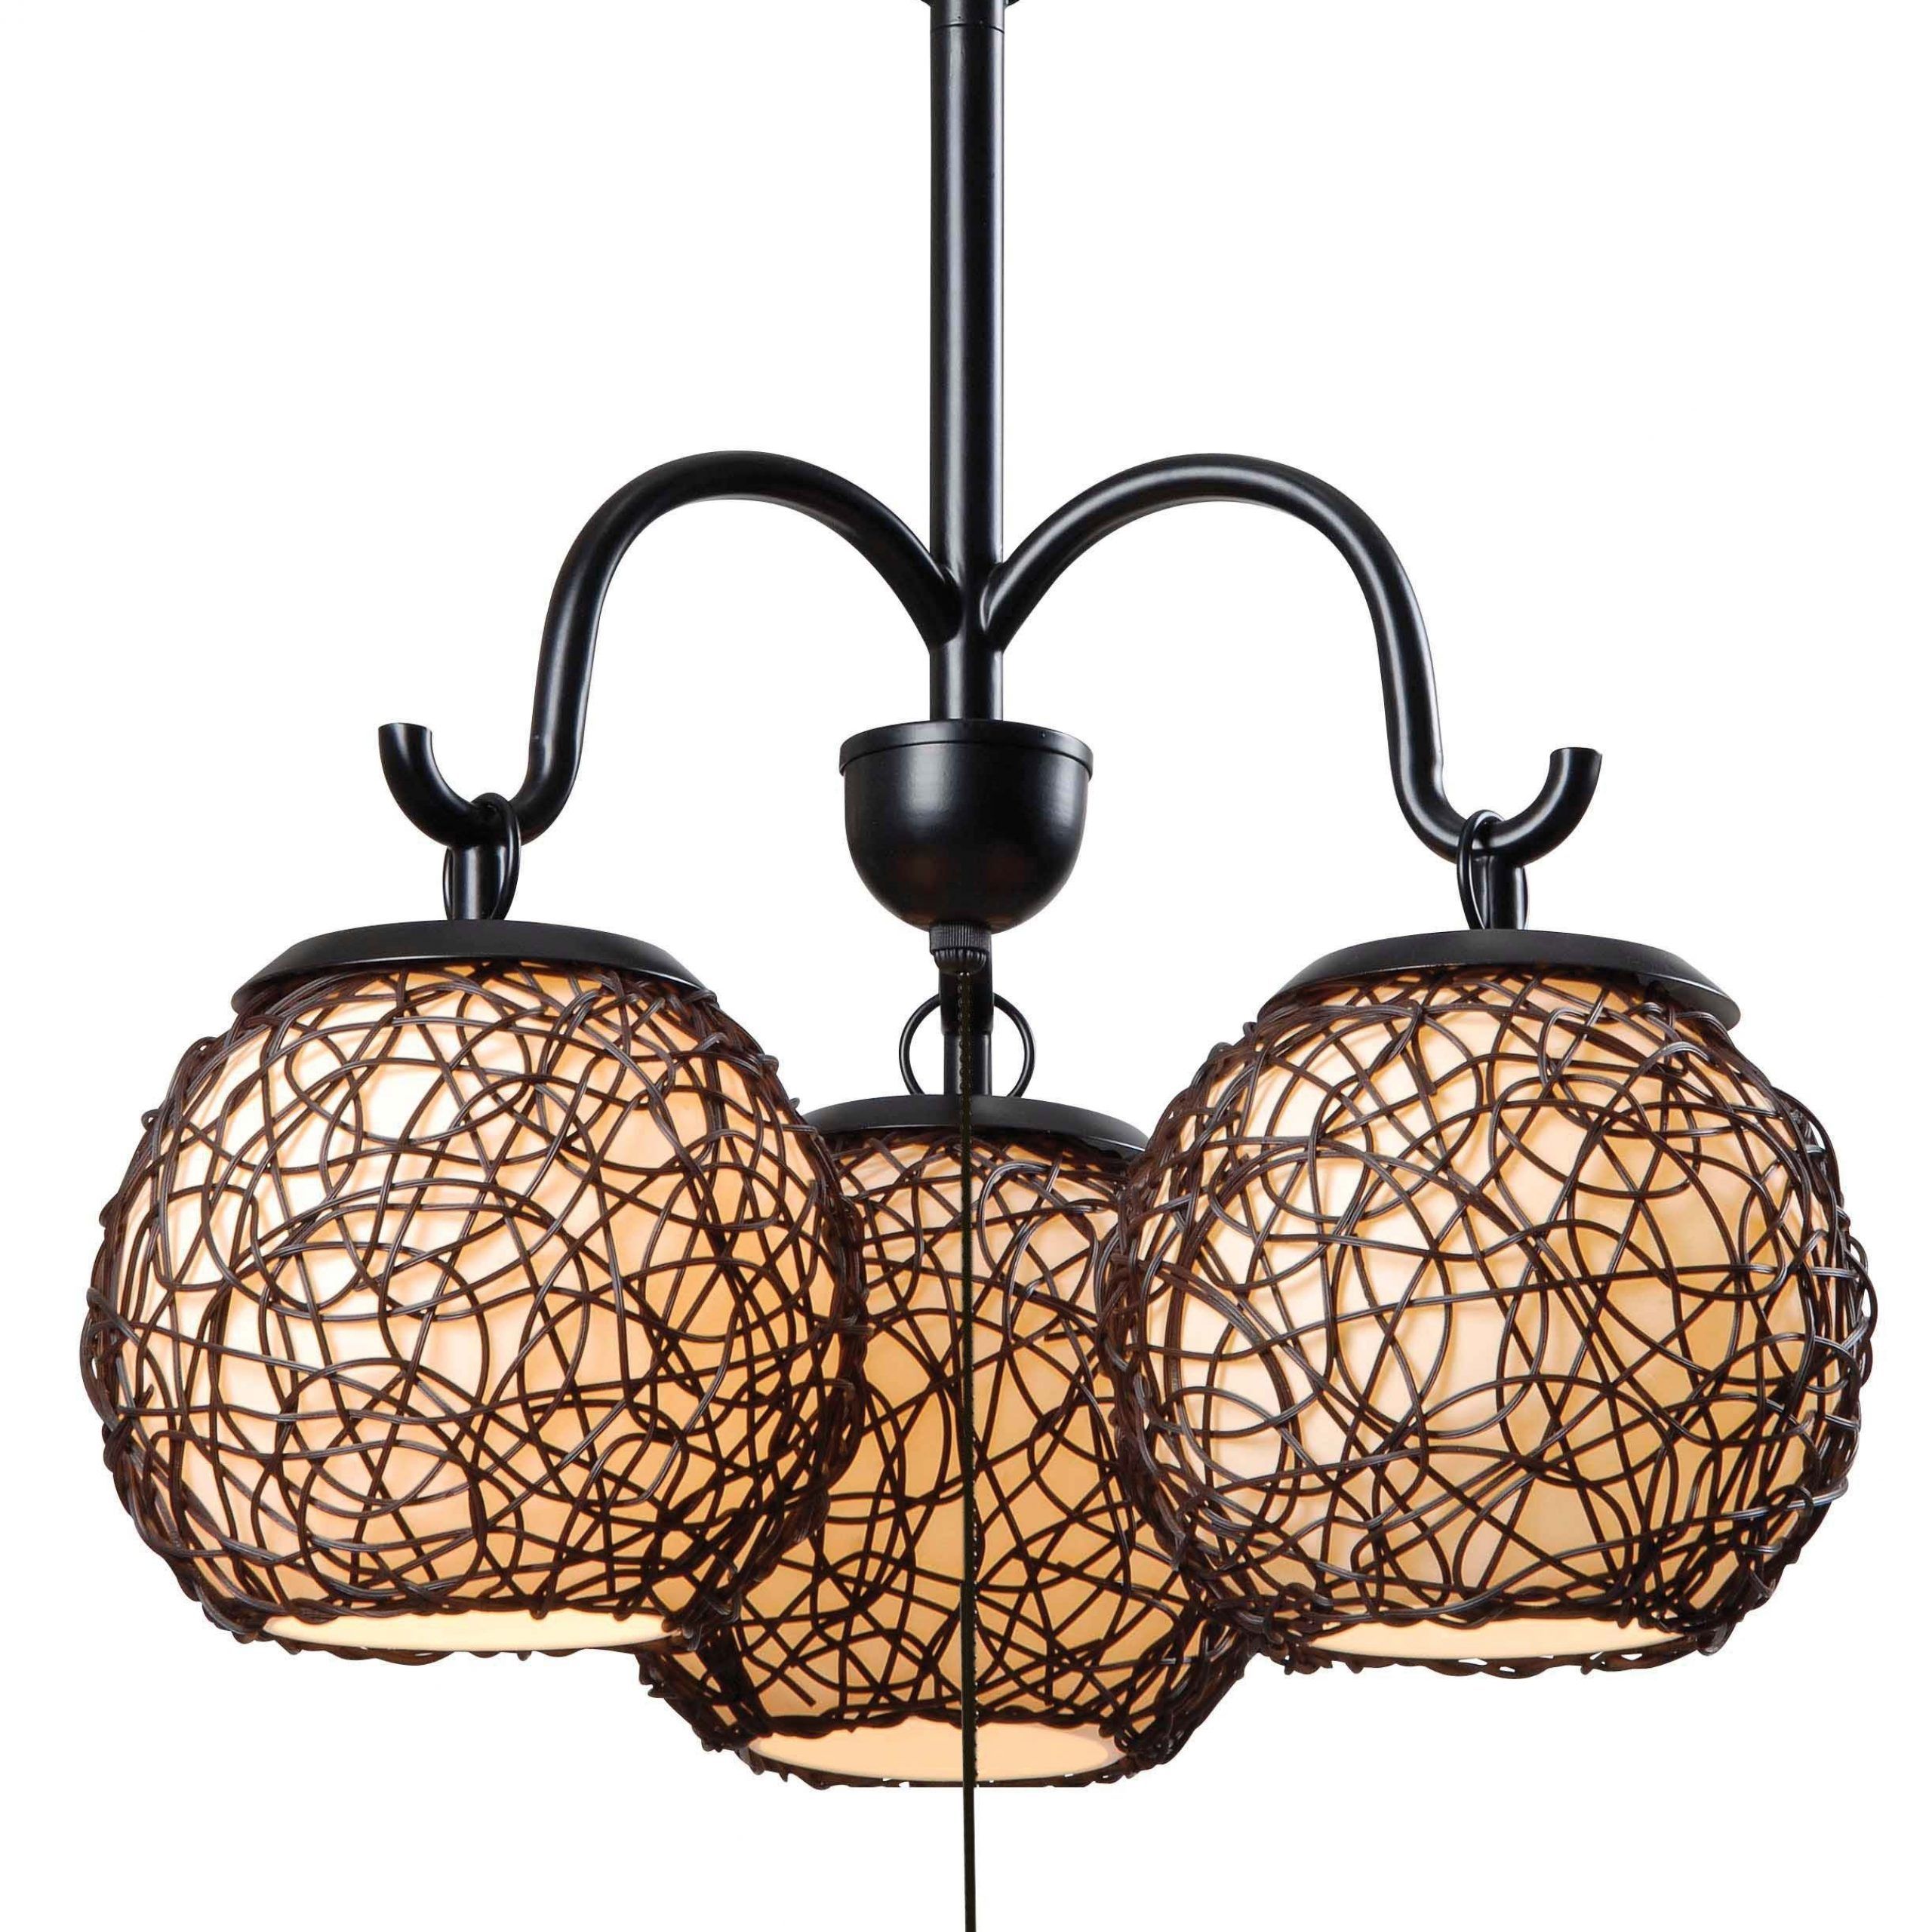 Castillo 3 Light Outdoor Chandelier From Kenroy (93403brz Intended For 3 Light Pendant Chandeliers (View 4 of 15)